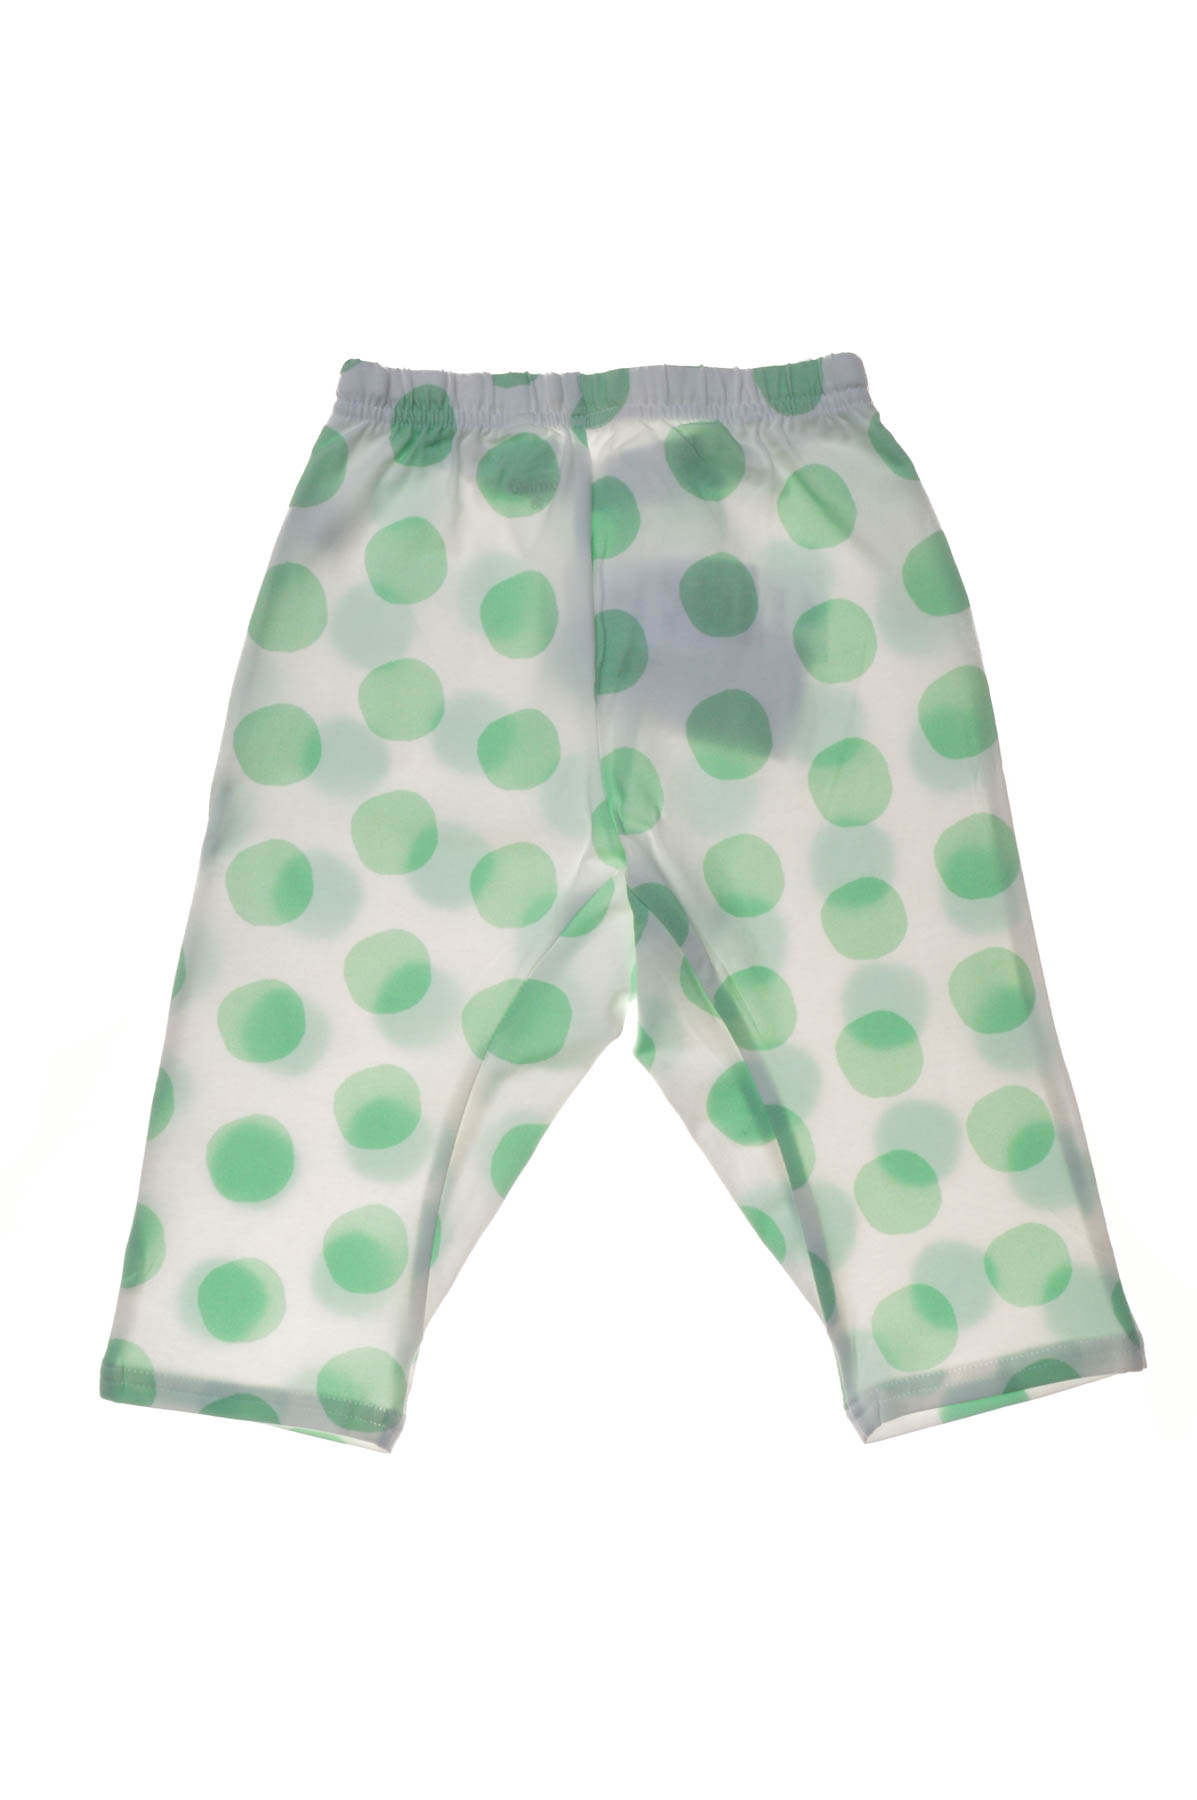 Trousers for girl - Lamino - 1